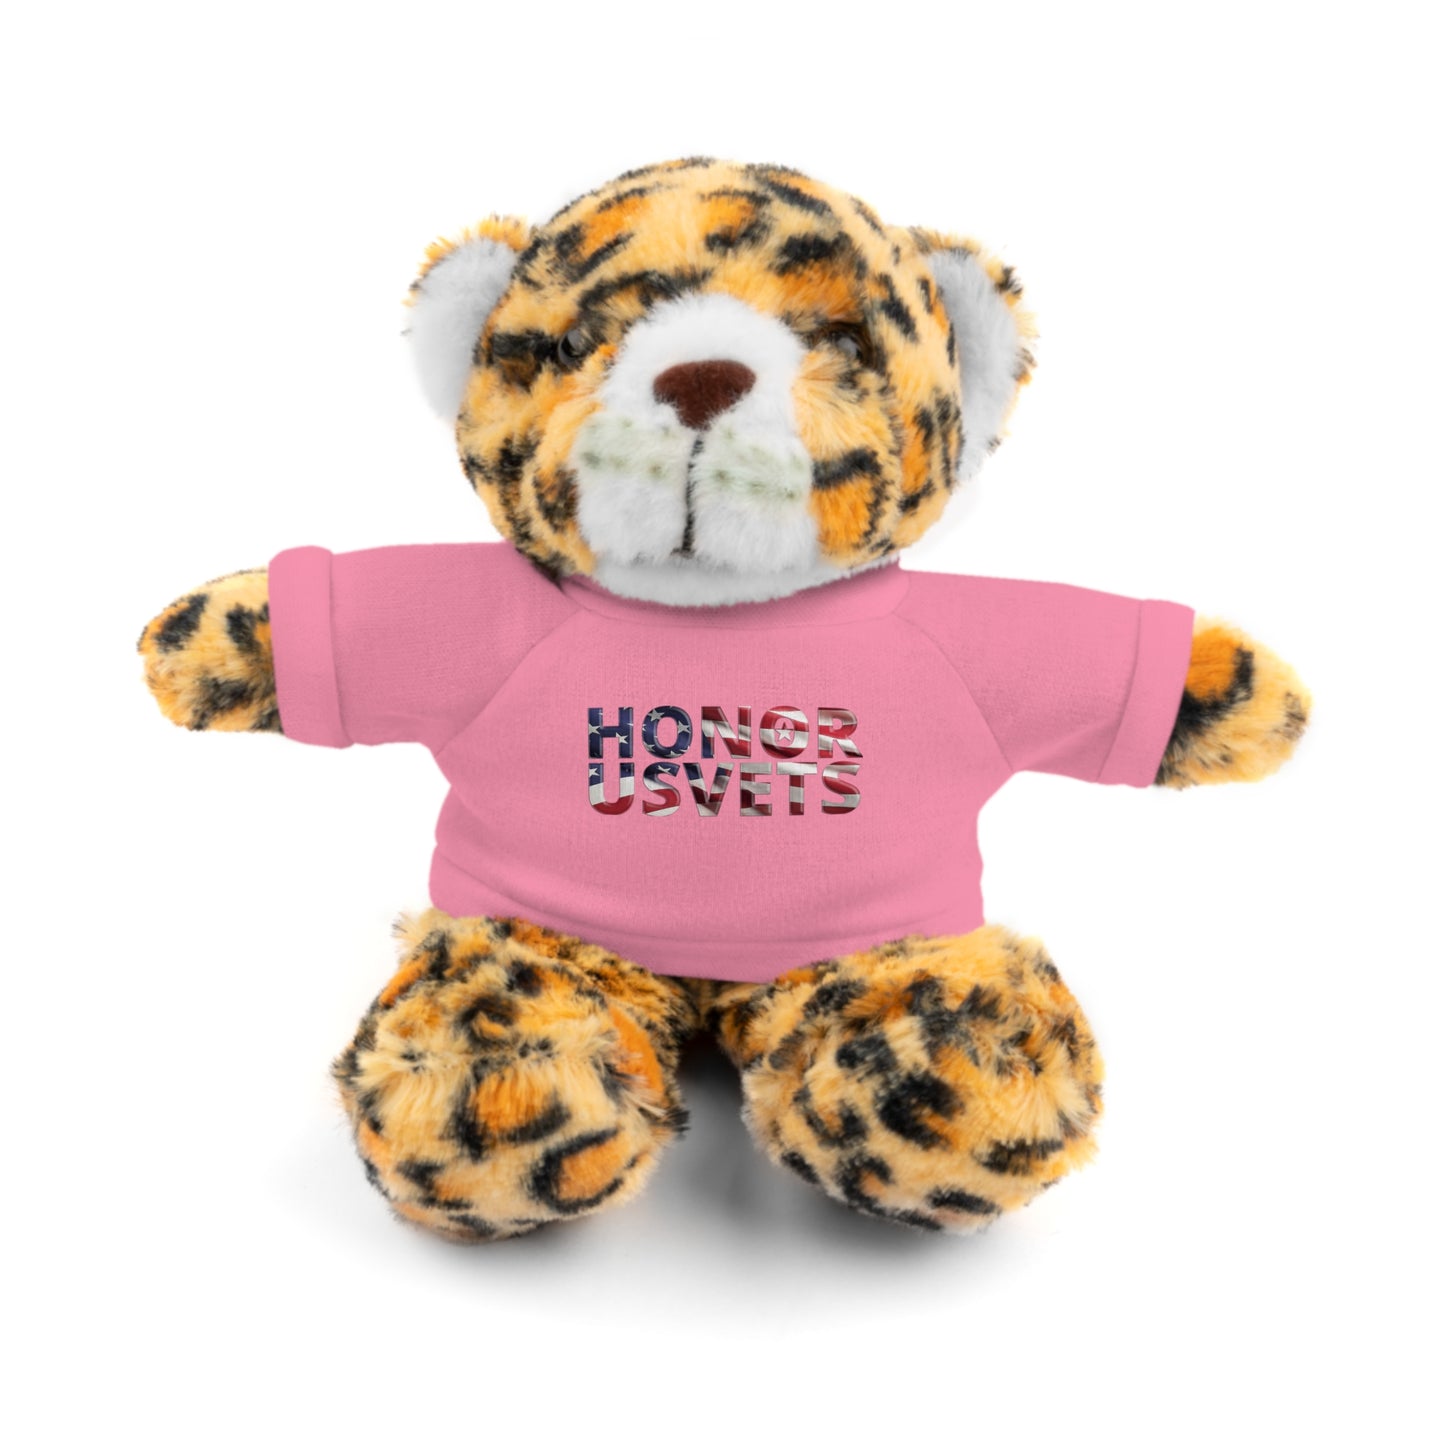 HONORUSVETS Plush Toy with T-Shirt - 5 Choices!